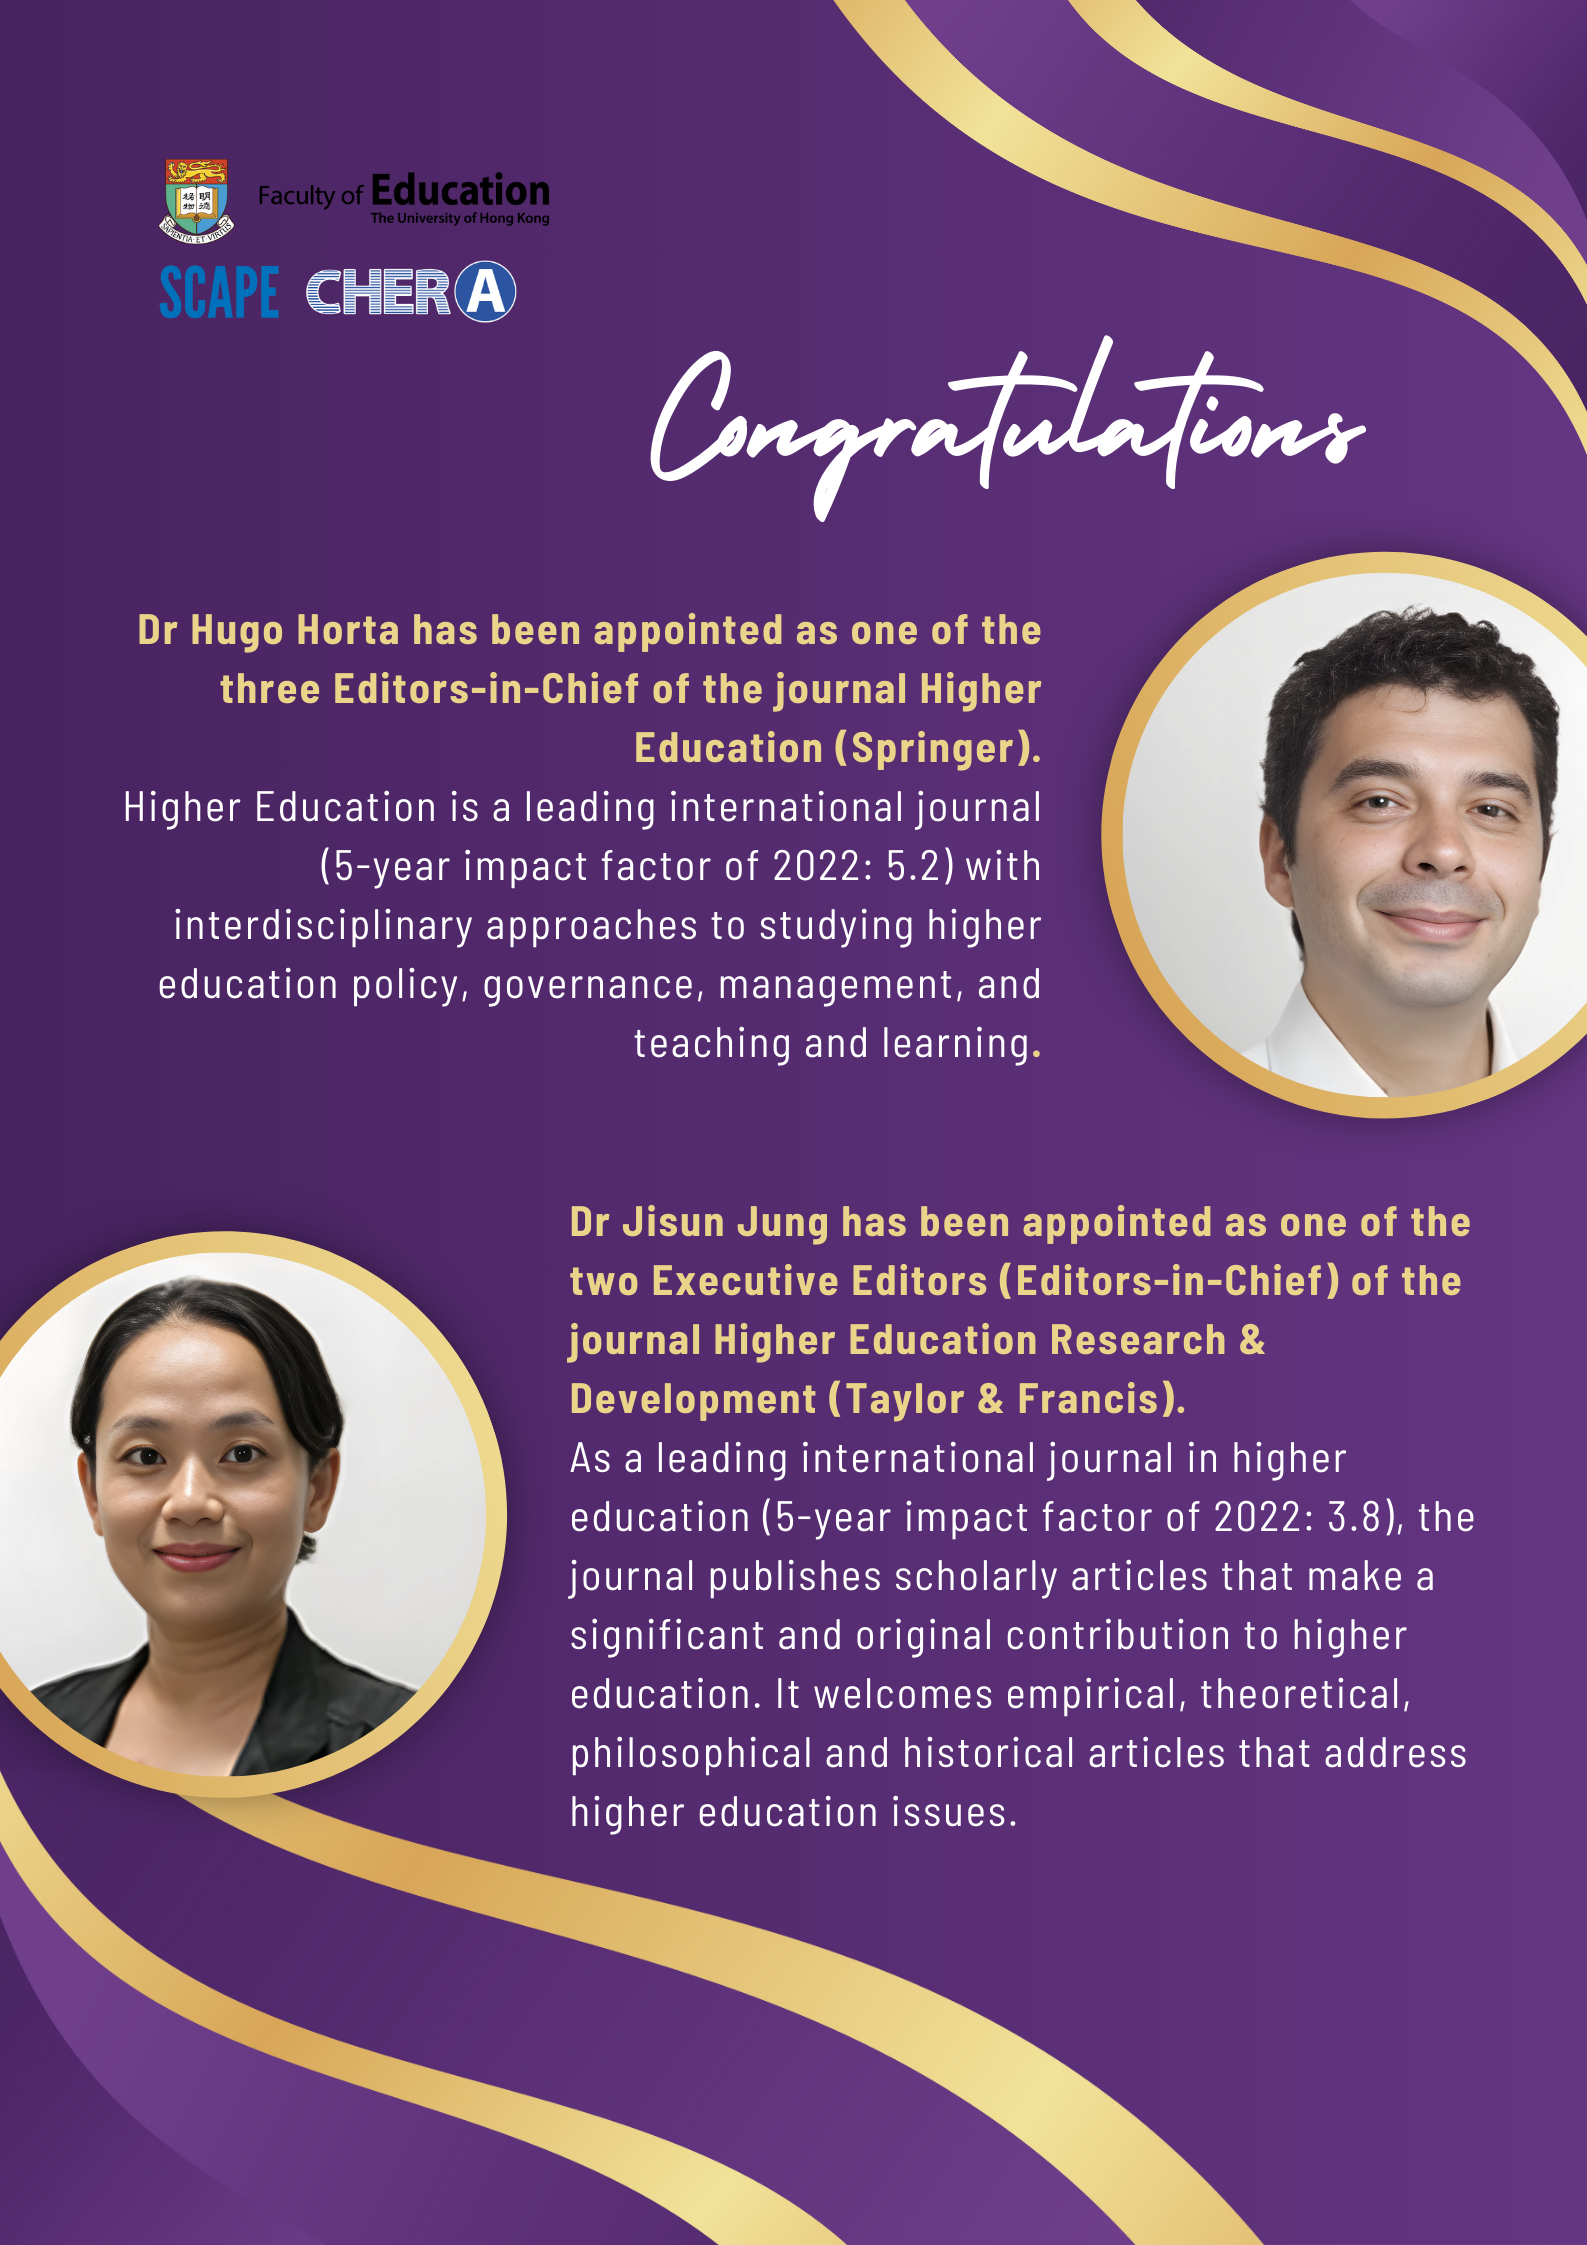 Congratulations to Dr Hugo Horta and Dr Jisun Jung for being appointed as Editors-in-Chief!